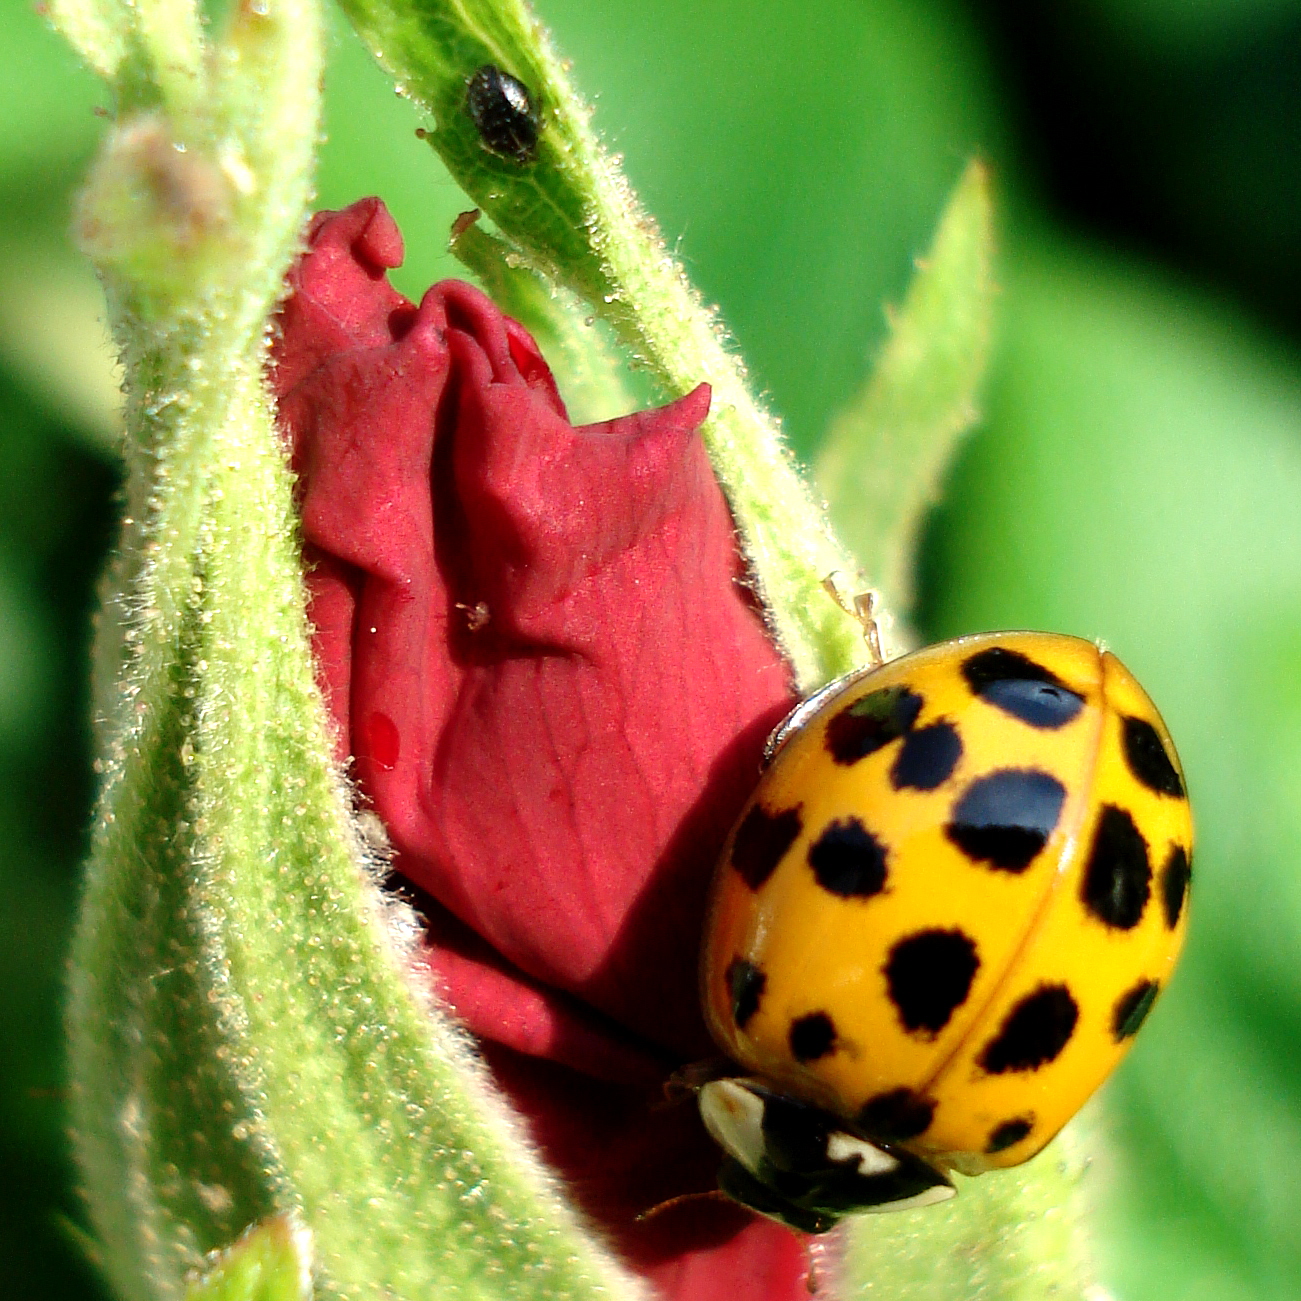 yellow_ladybug_on_a_red_rose_by_Dieffi.jpg